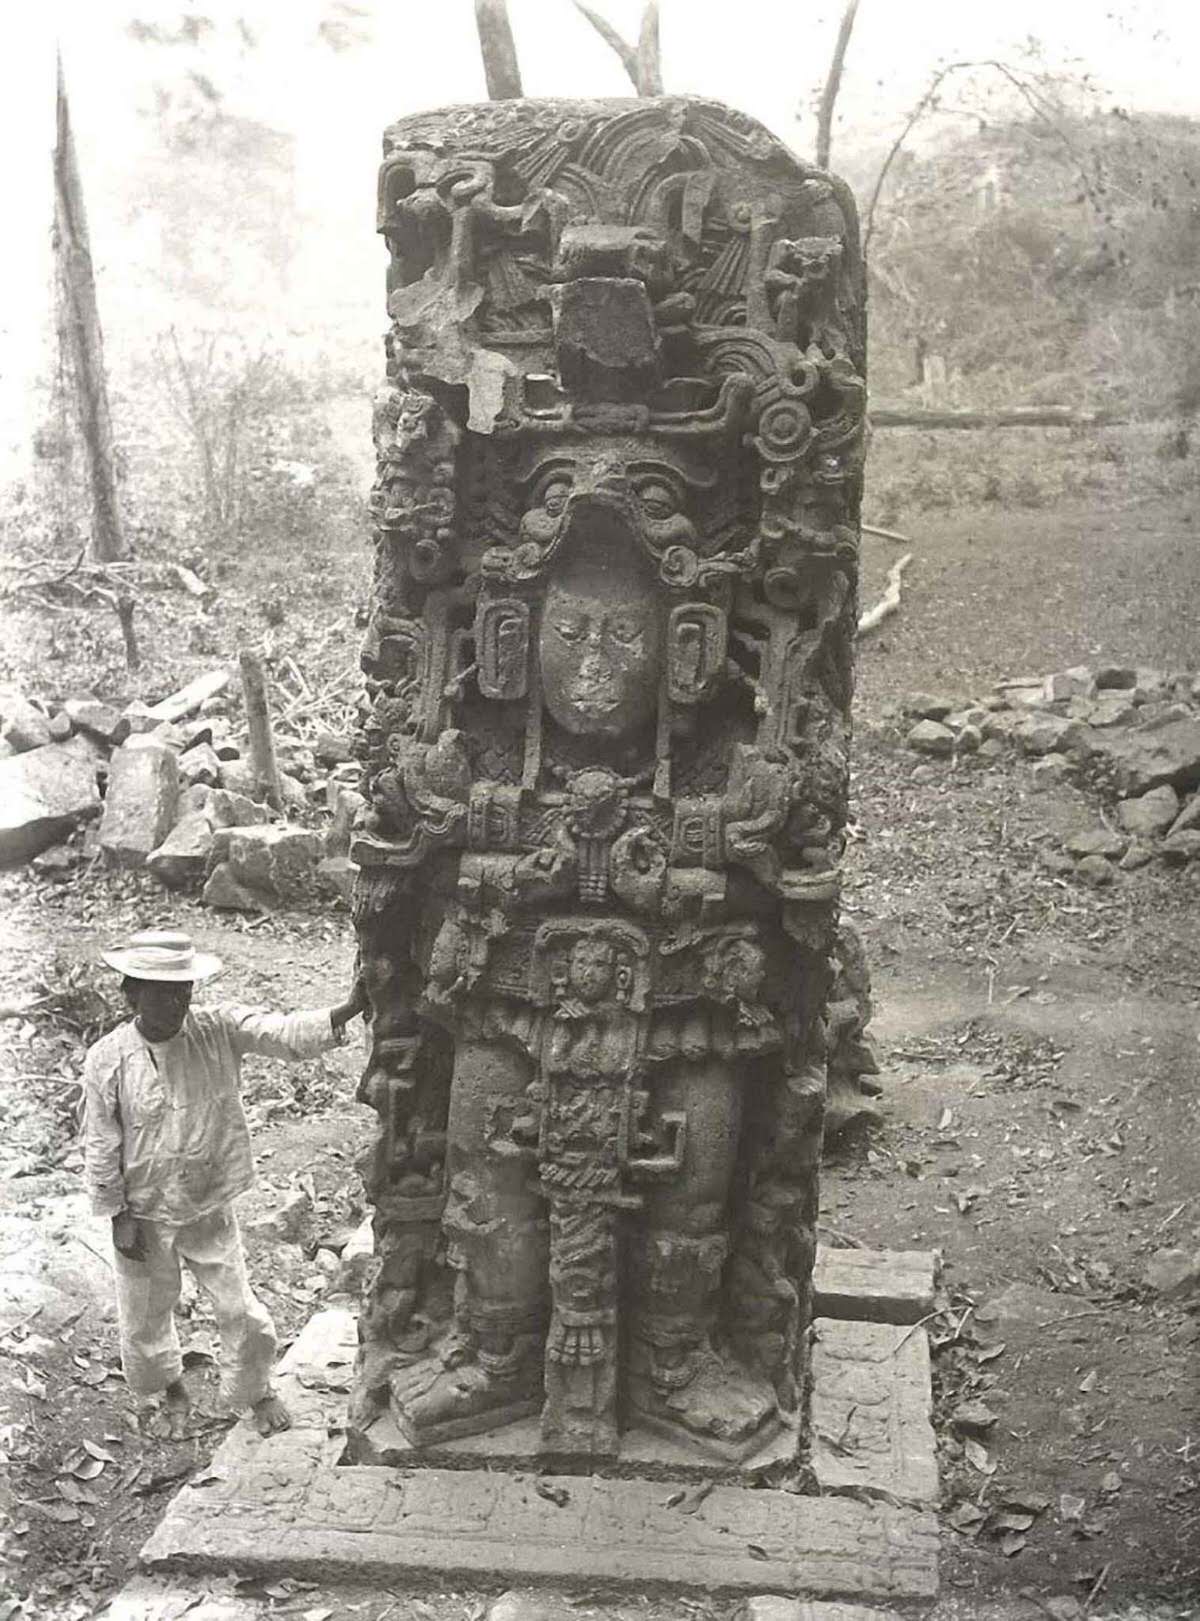 The discovery of an ancient Maya statue deep within the jungles of Honduras, 1885.